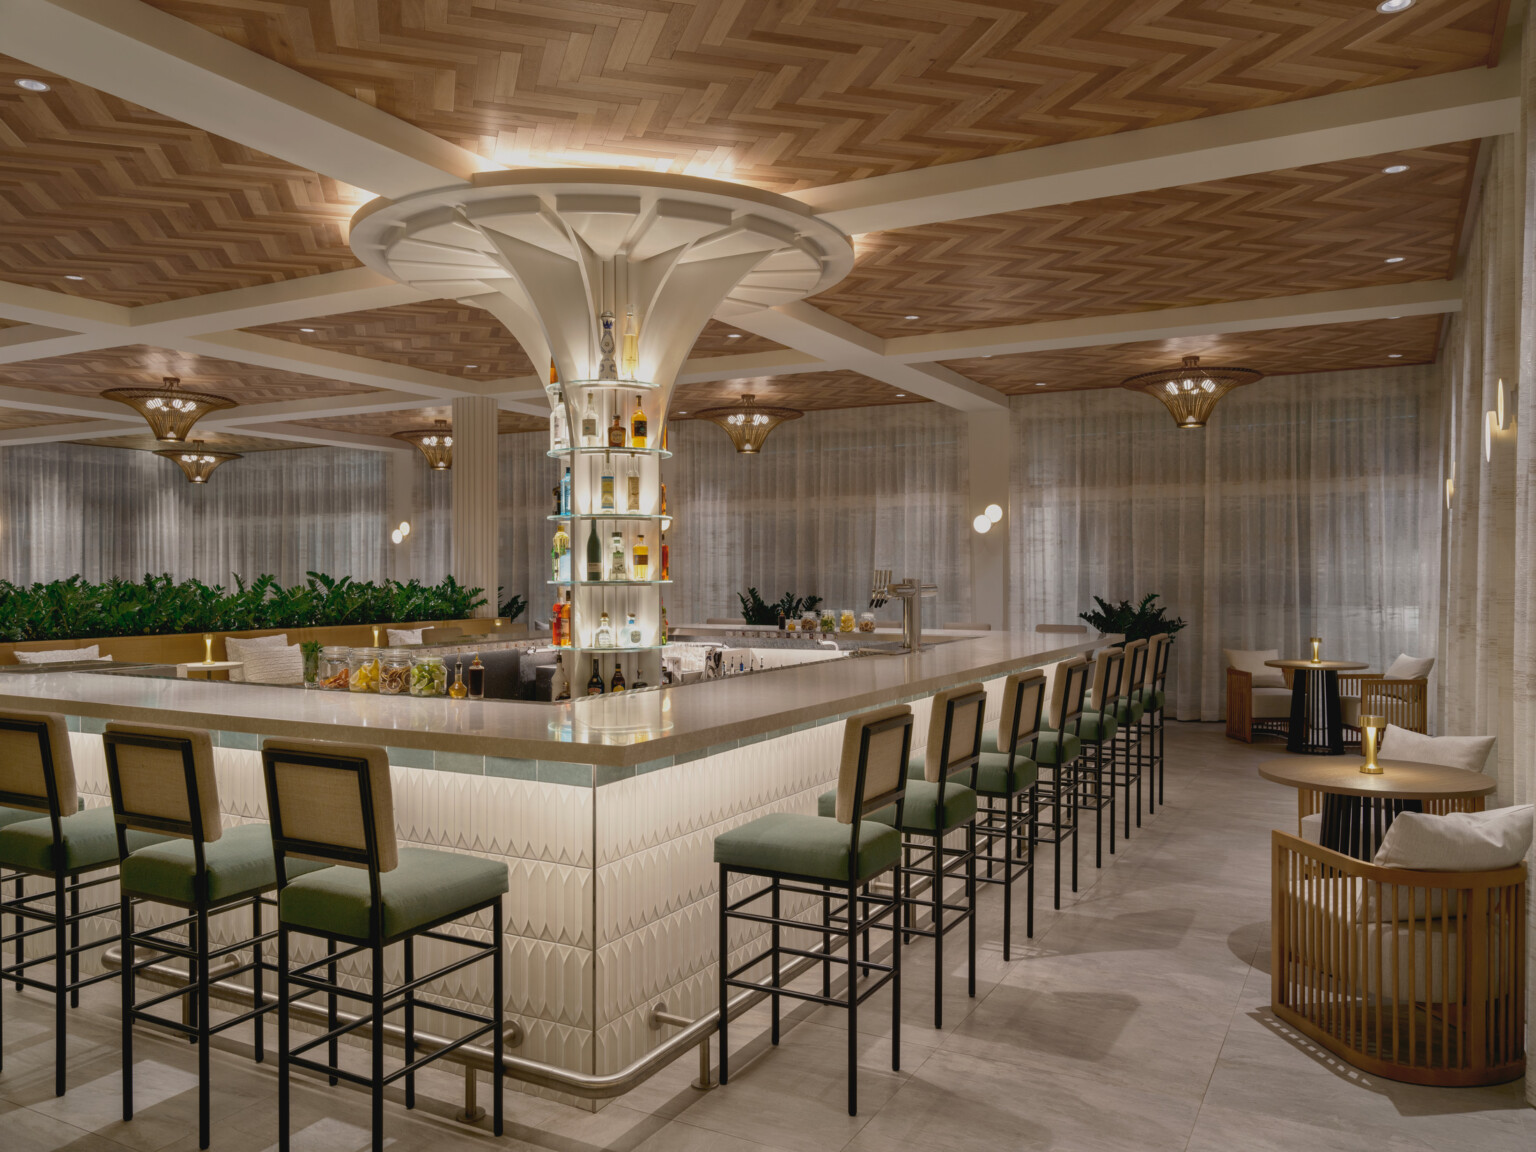 Elegant hotel bar with wooden chevron ceiling, white beams, uplighting, and bar stools with green cushions